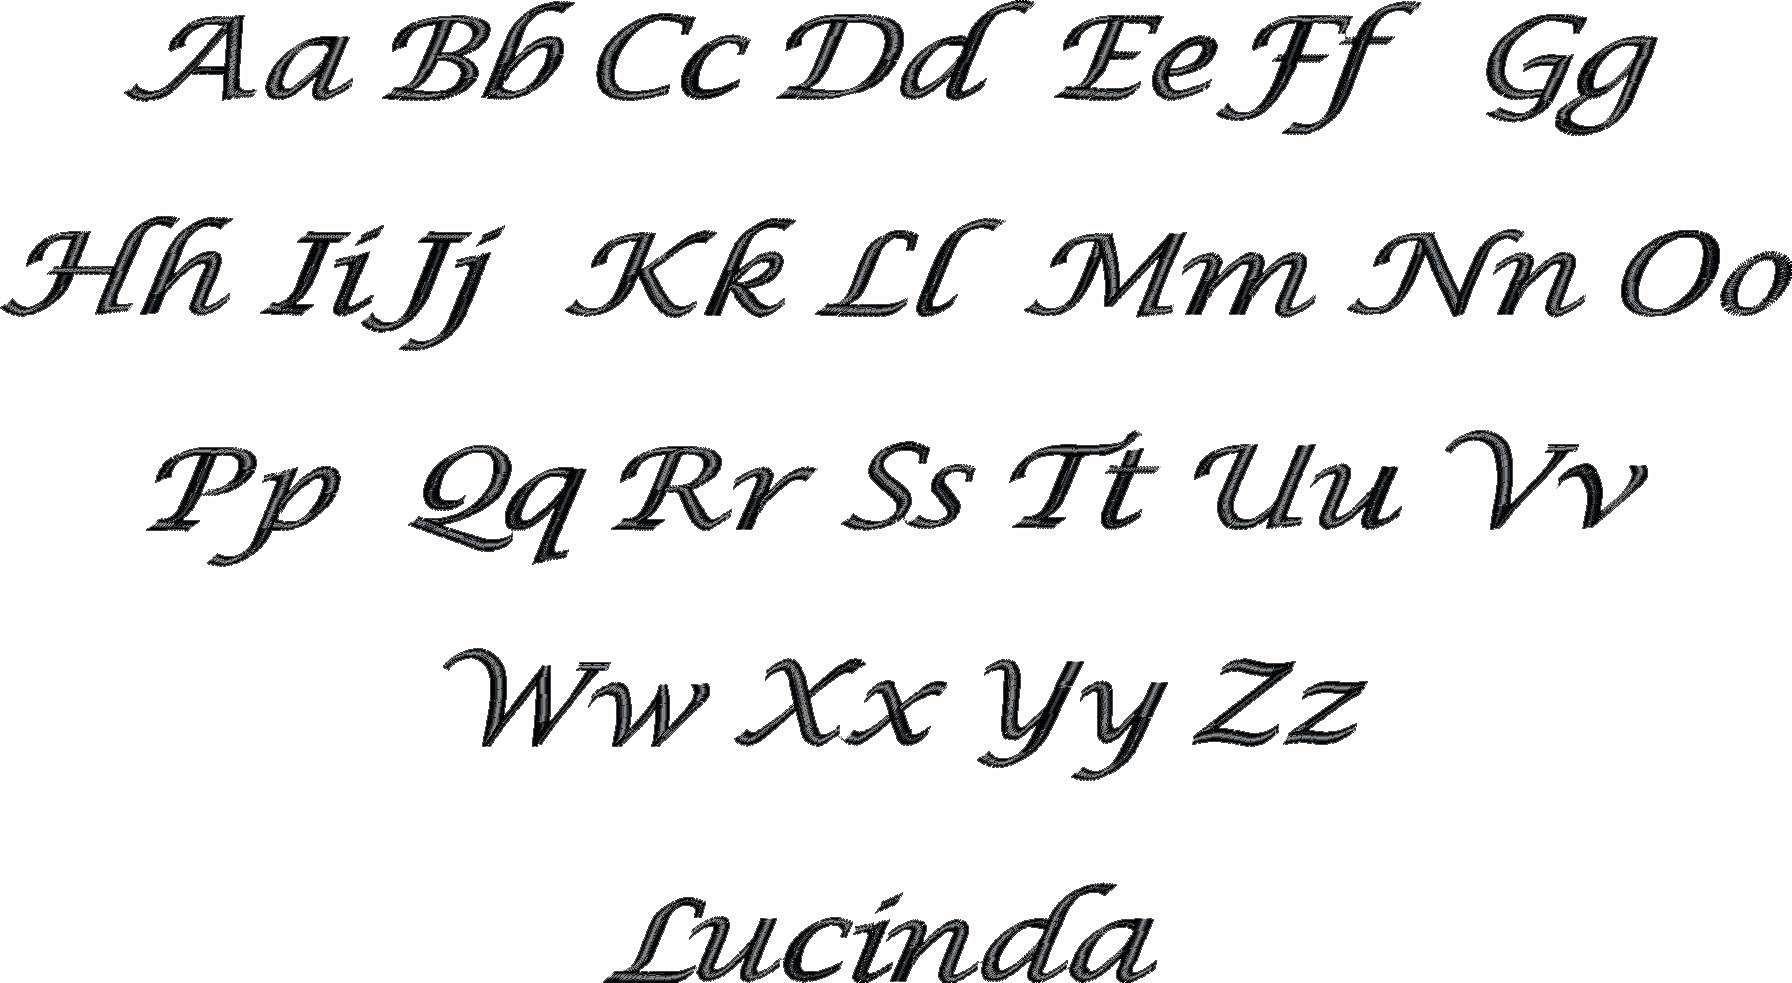 Add lucida calligraphy font to my computer cricut design space